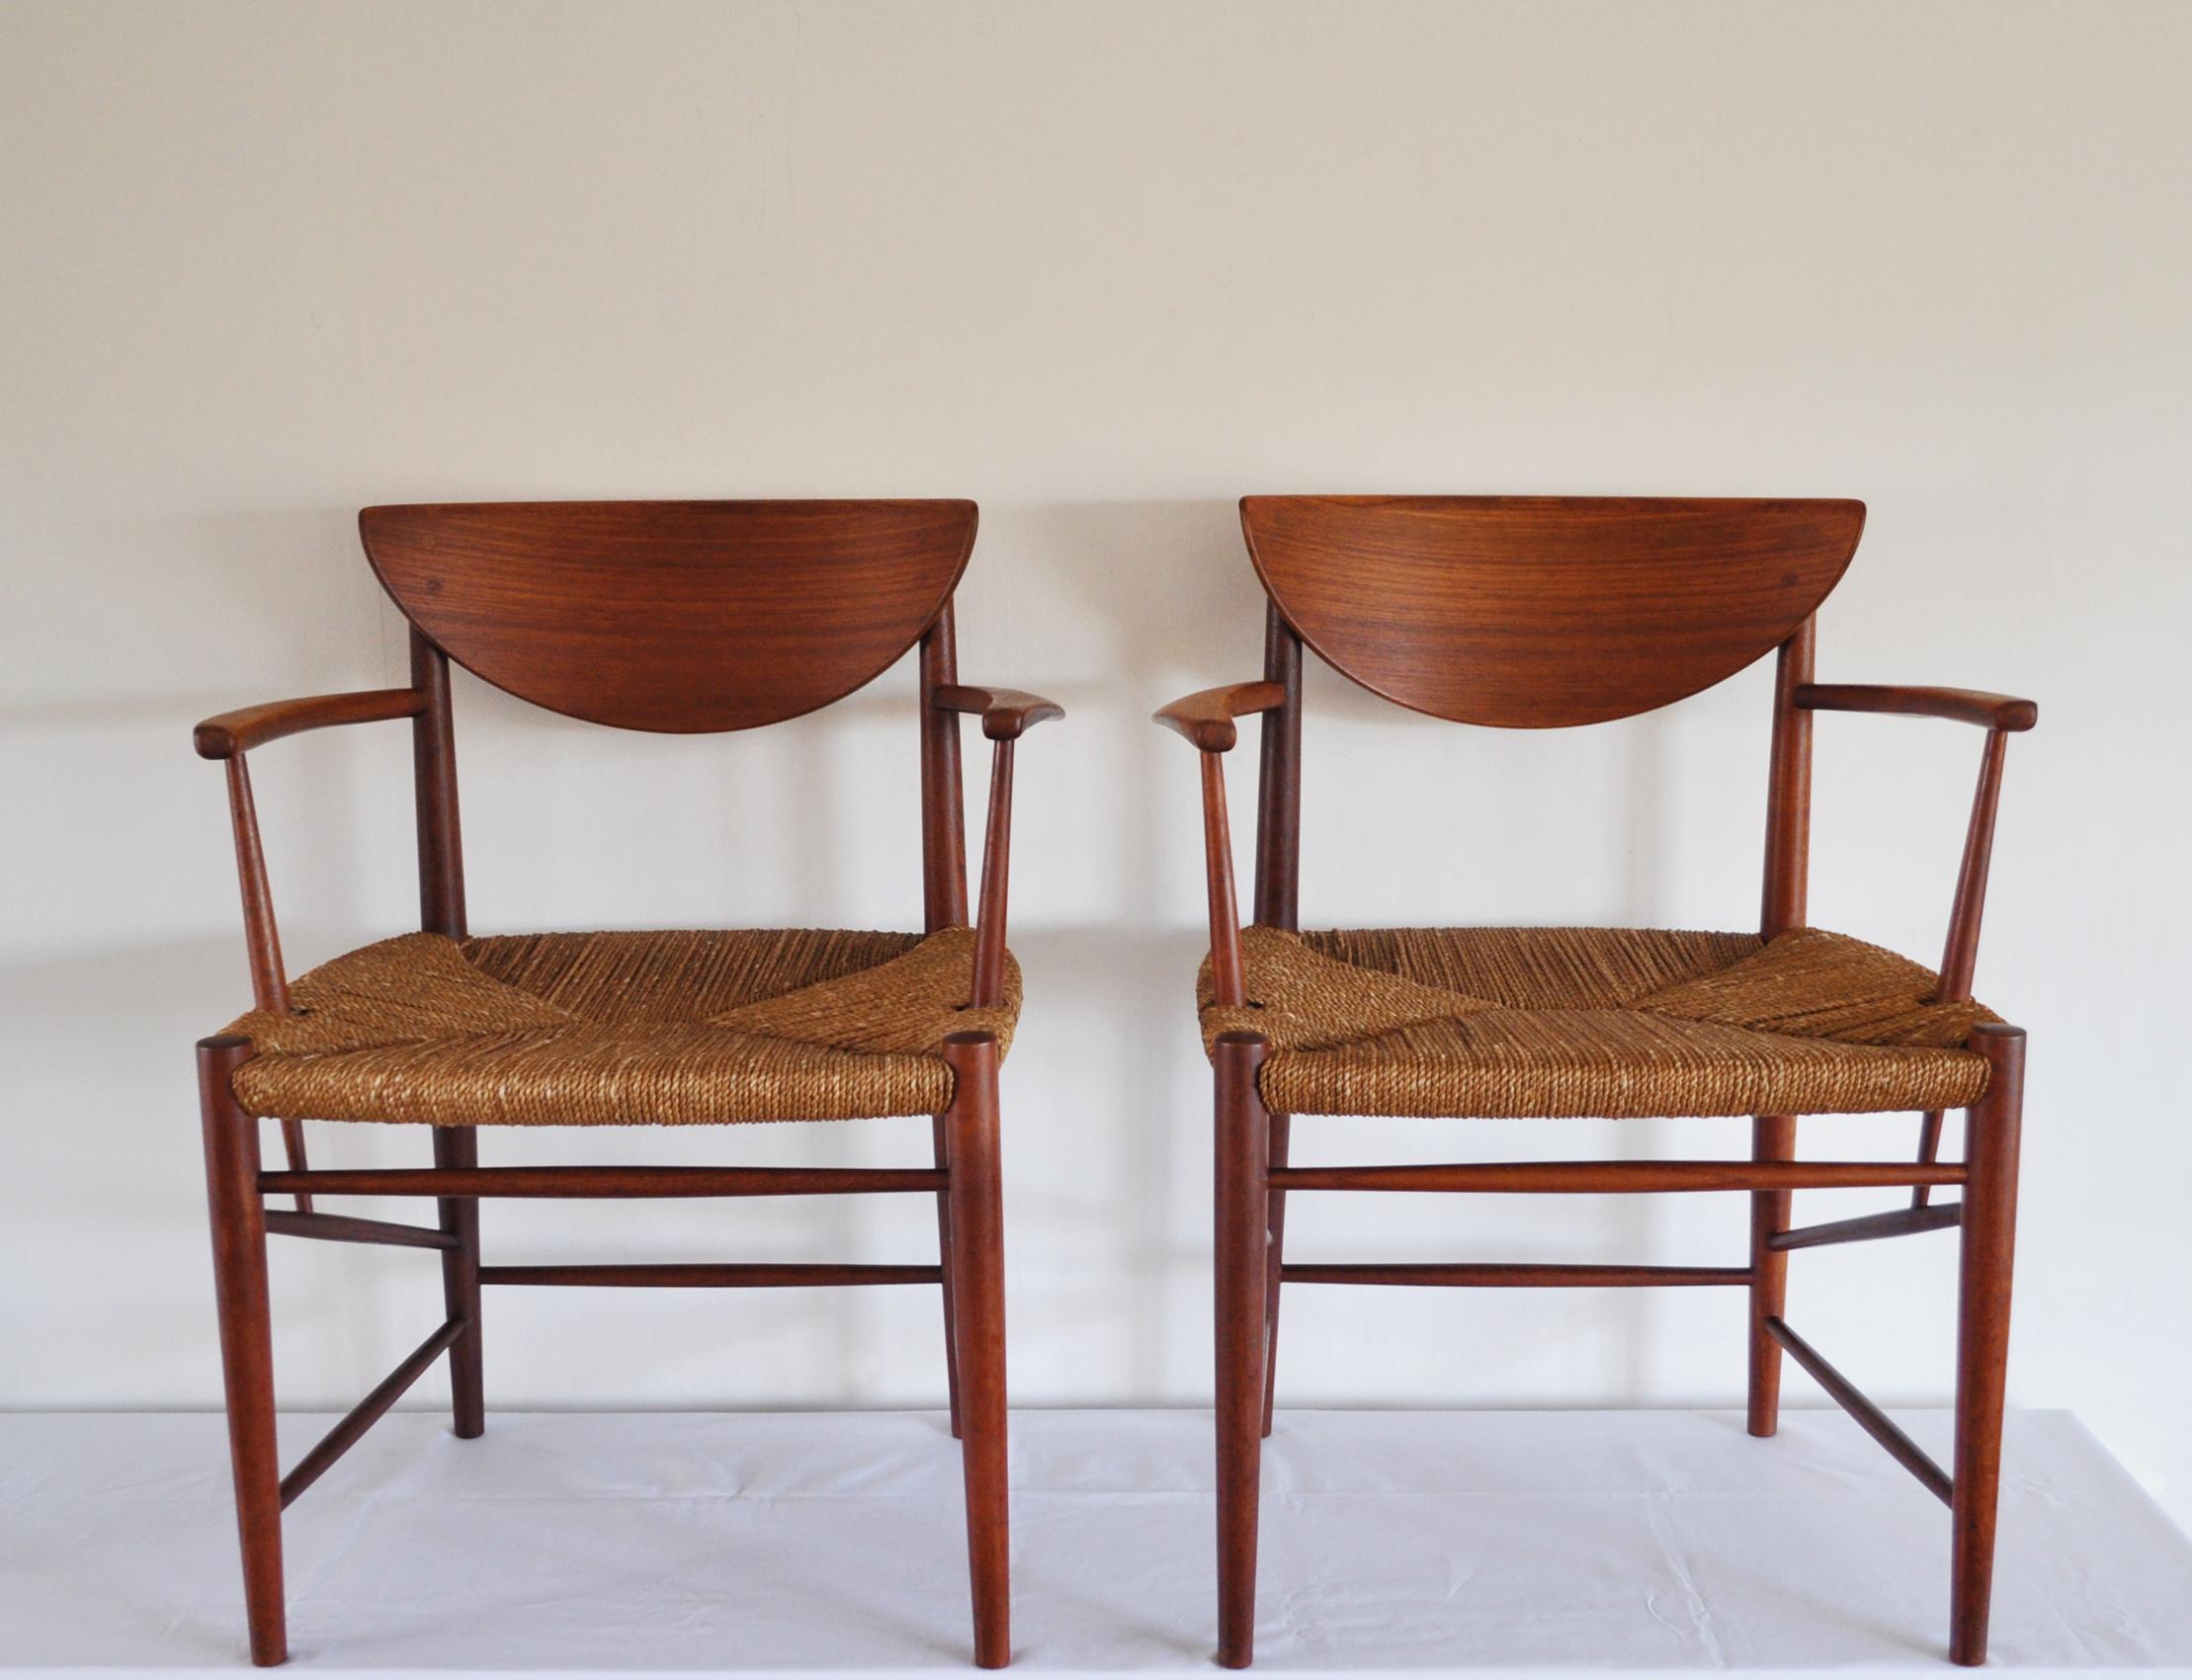 A pair of armchairs model 317 designed by Peter Hvidt & Orla Mølgaard-Nielsen made of solid teak wood with original cord seat. Manufactured by Søborg Møbelfabrik, 1956.
Very good condition, with minor signs of usage.

Dimensions:
Width 61